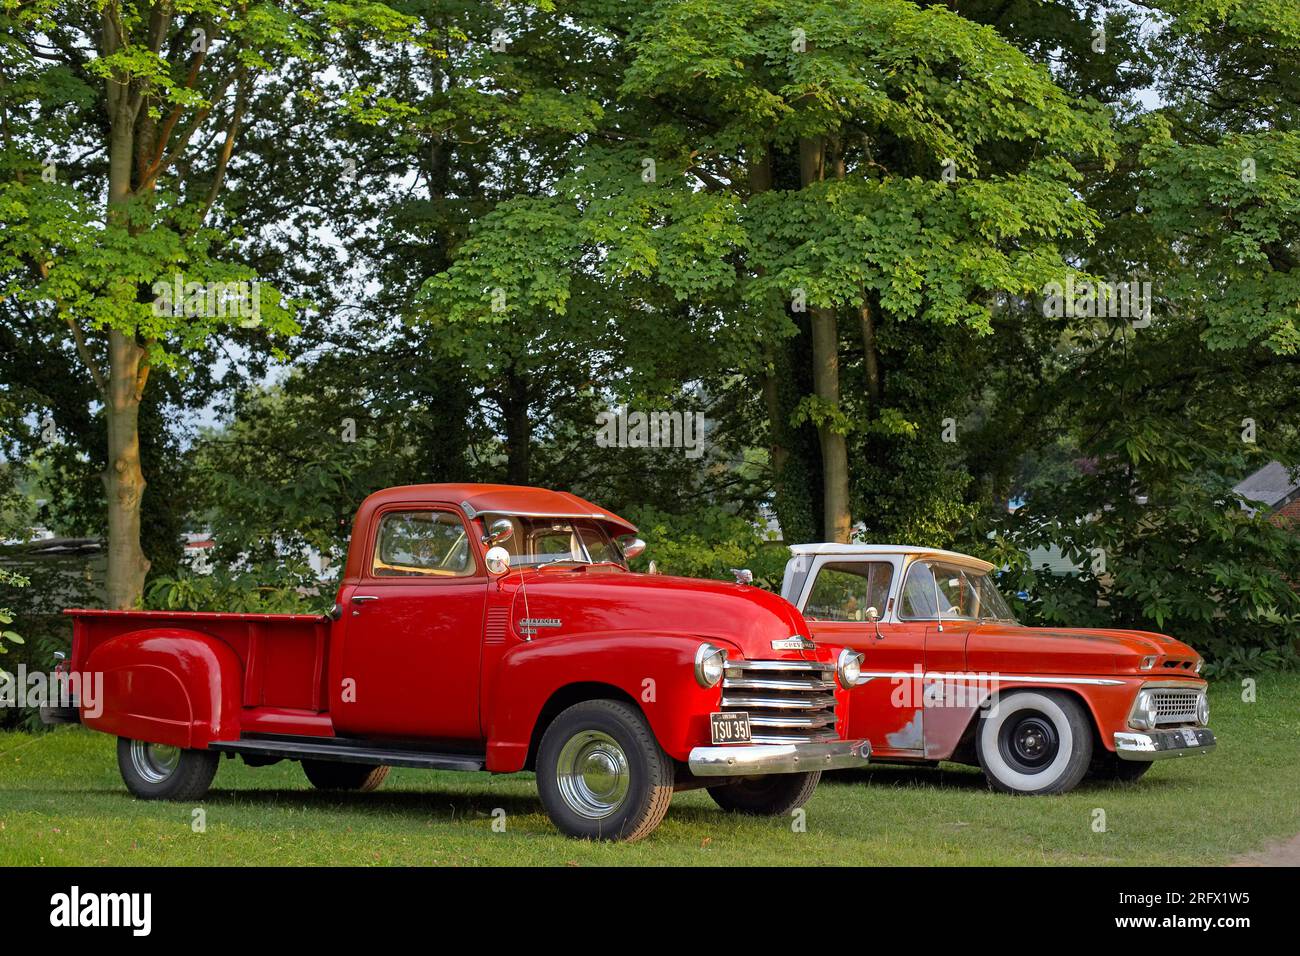 Two traditional style American classic cars Stock Photo